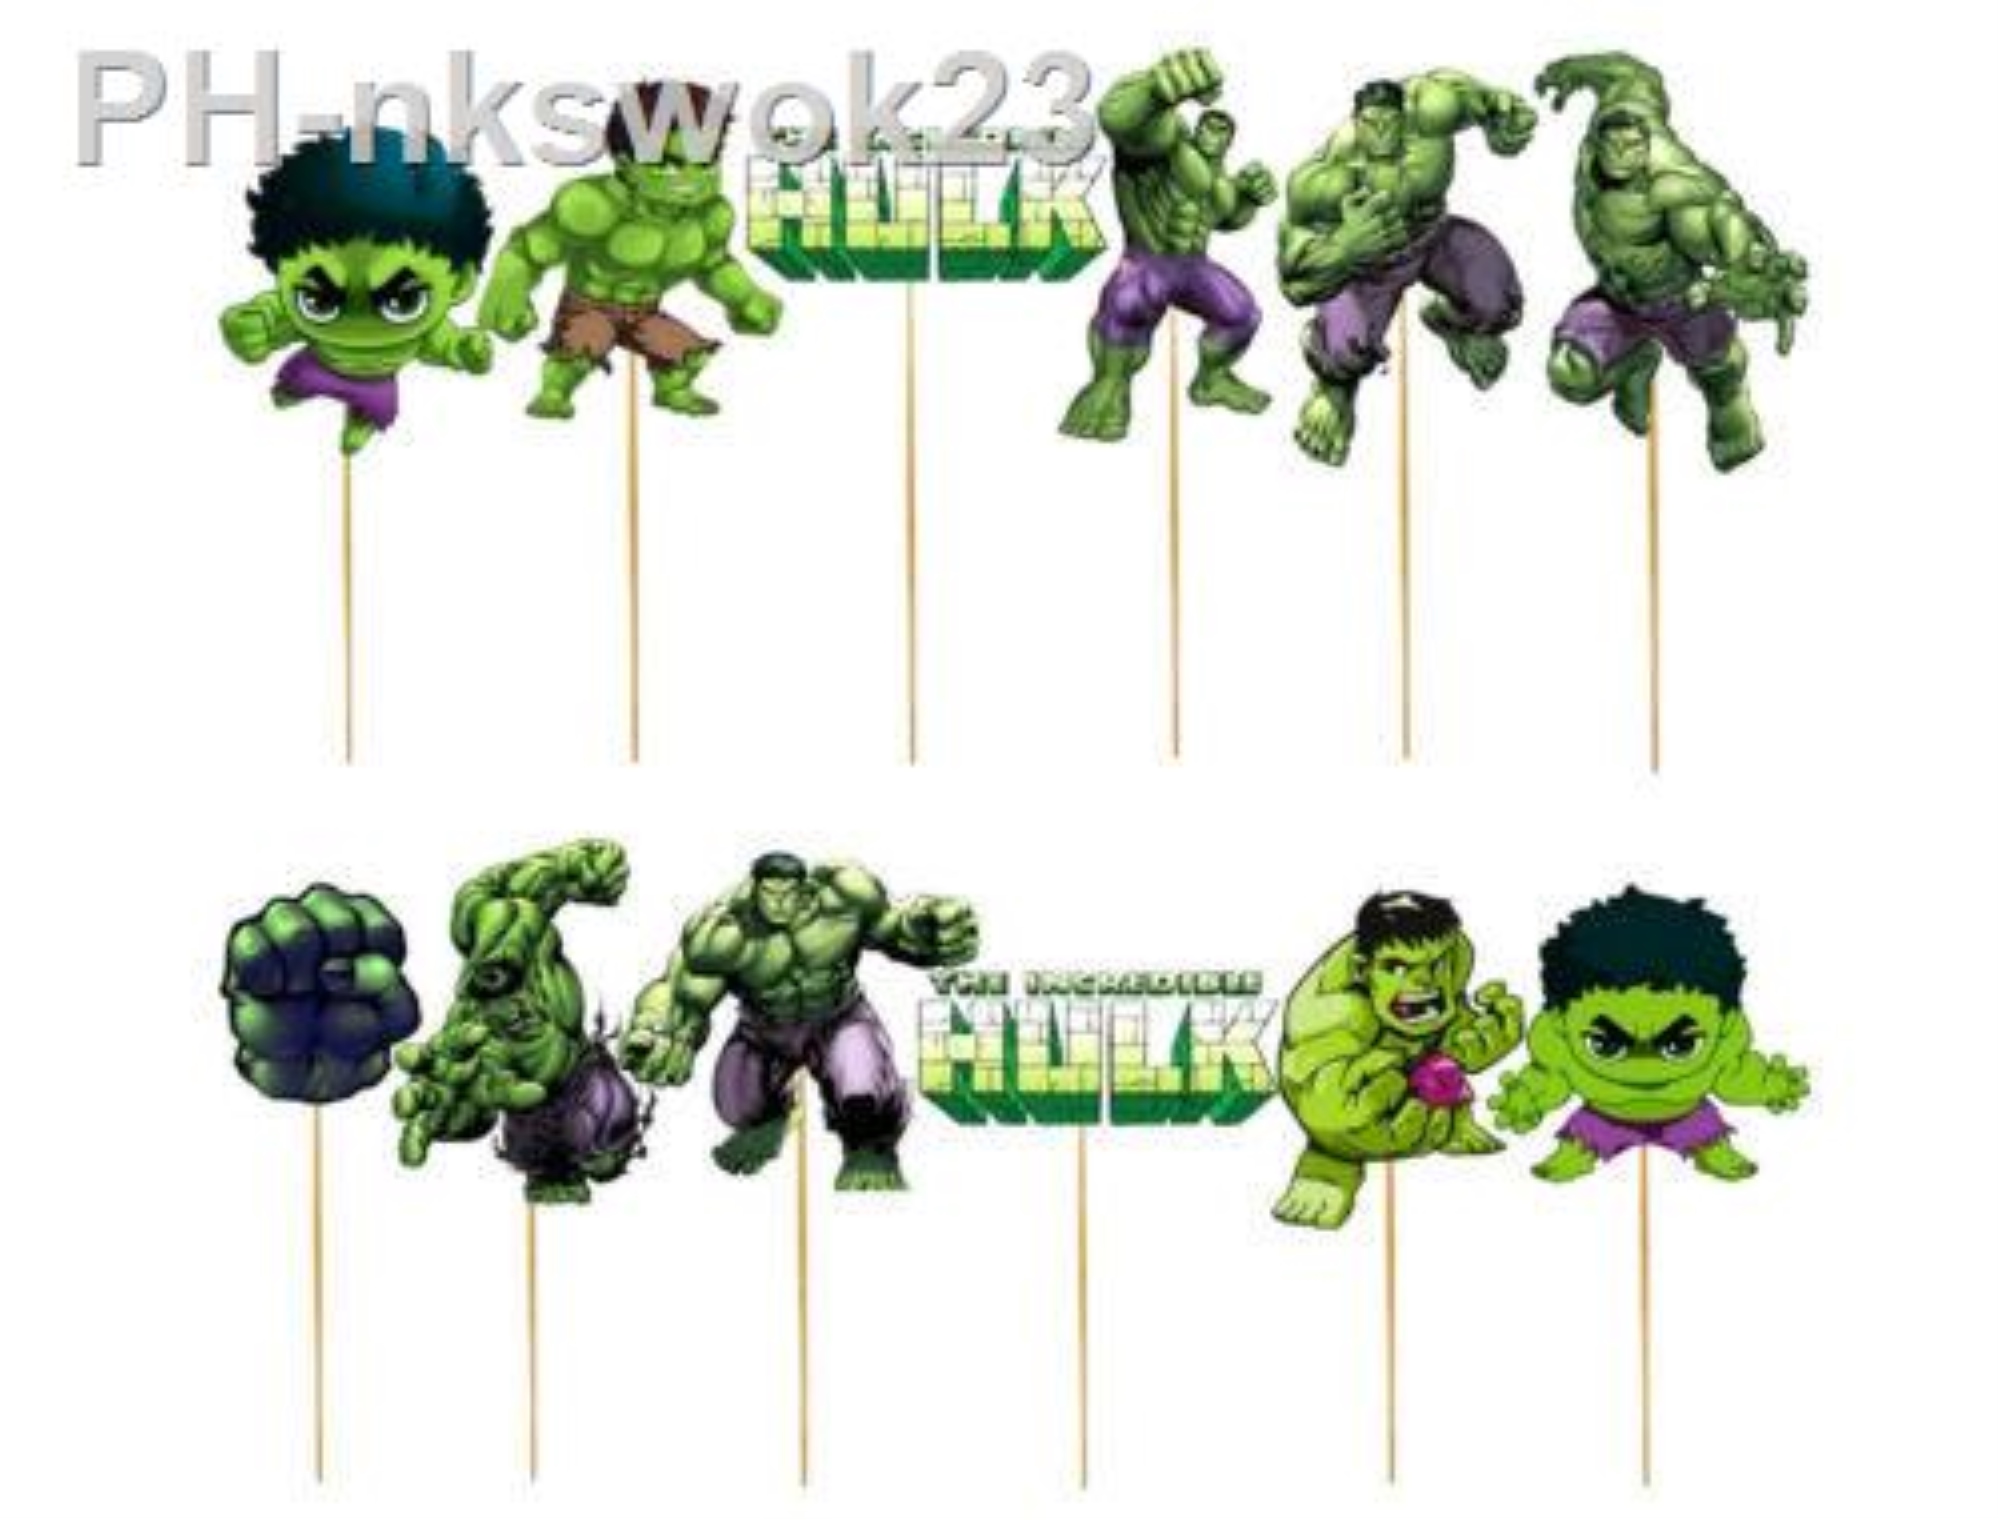 Super Hero Hulk Party Supplies Decorations Kids Birthday Disposable  Tableware Tablecloth Cups plate Party Theme Favors